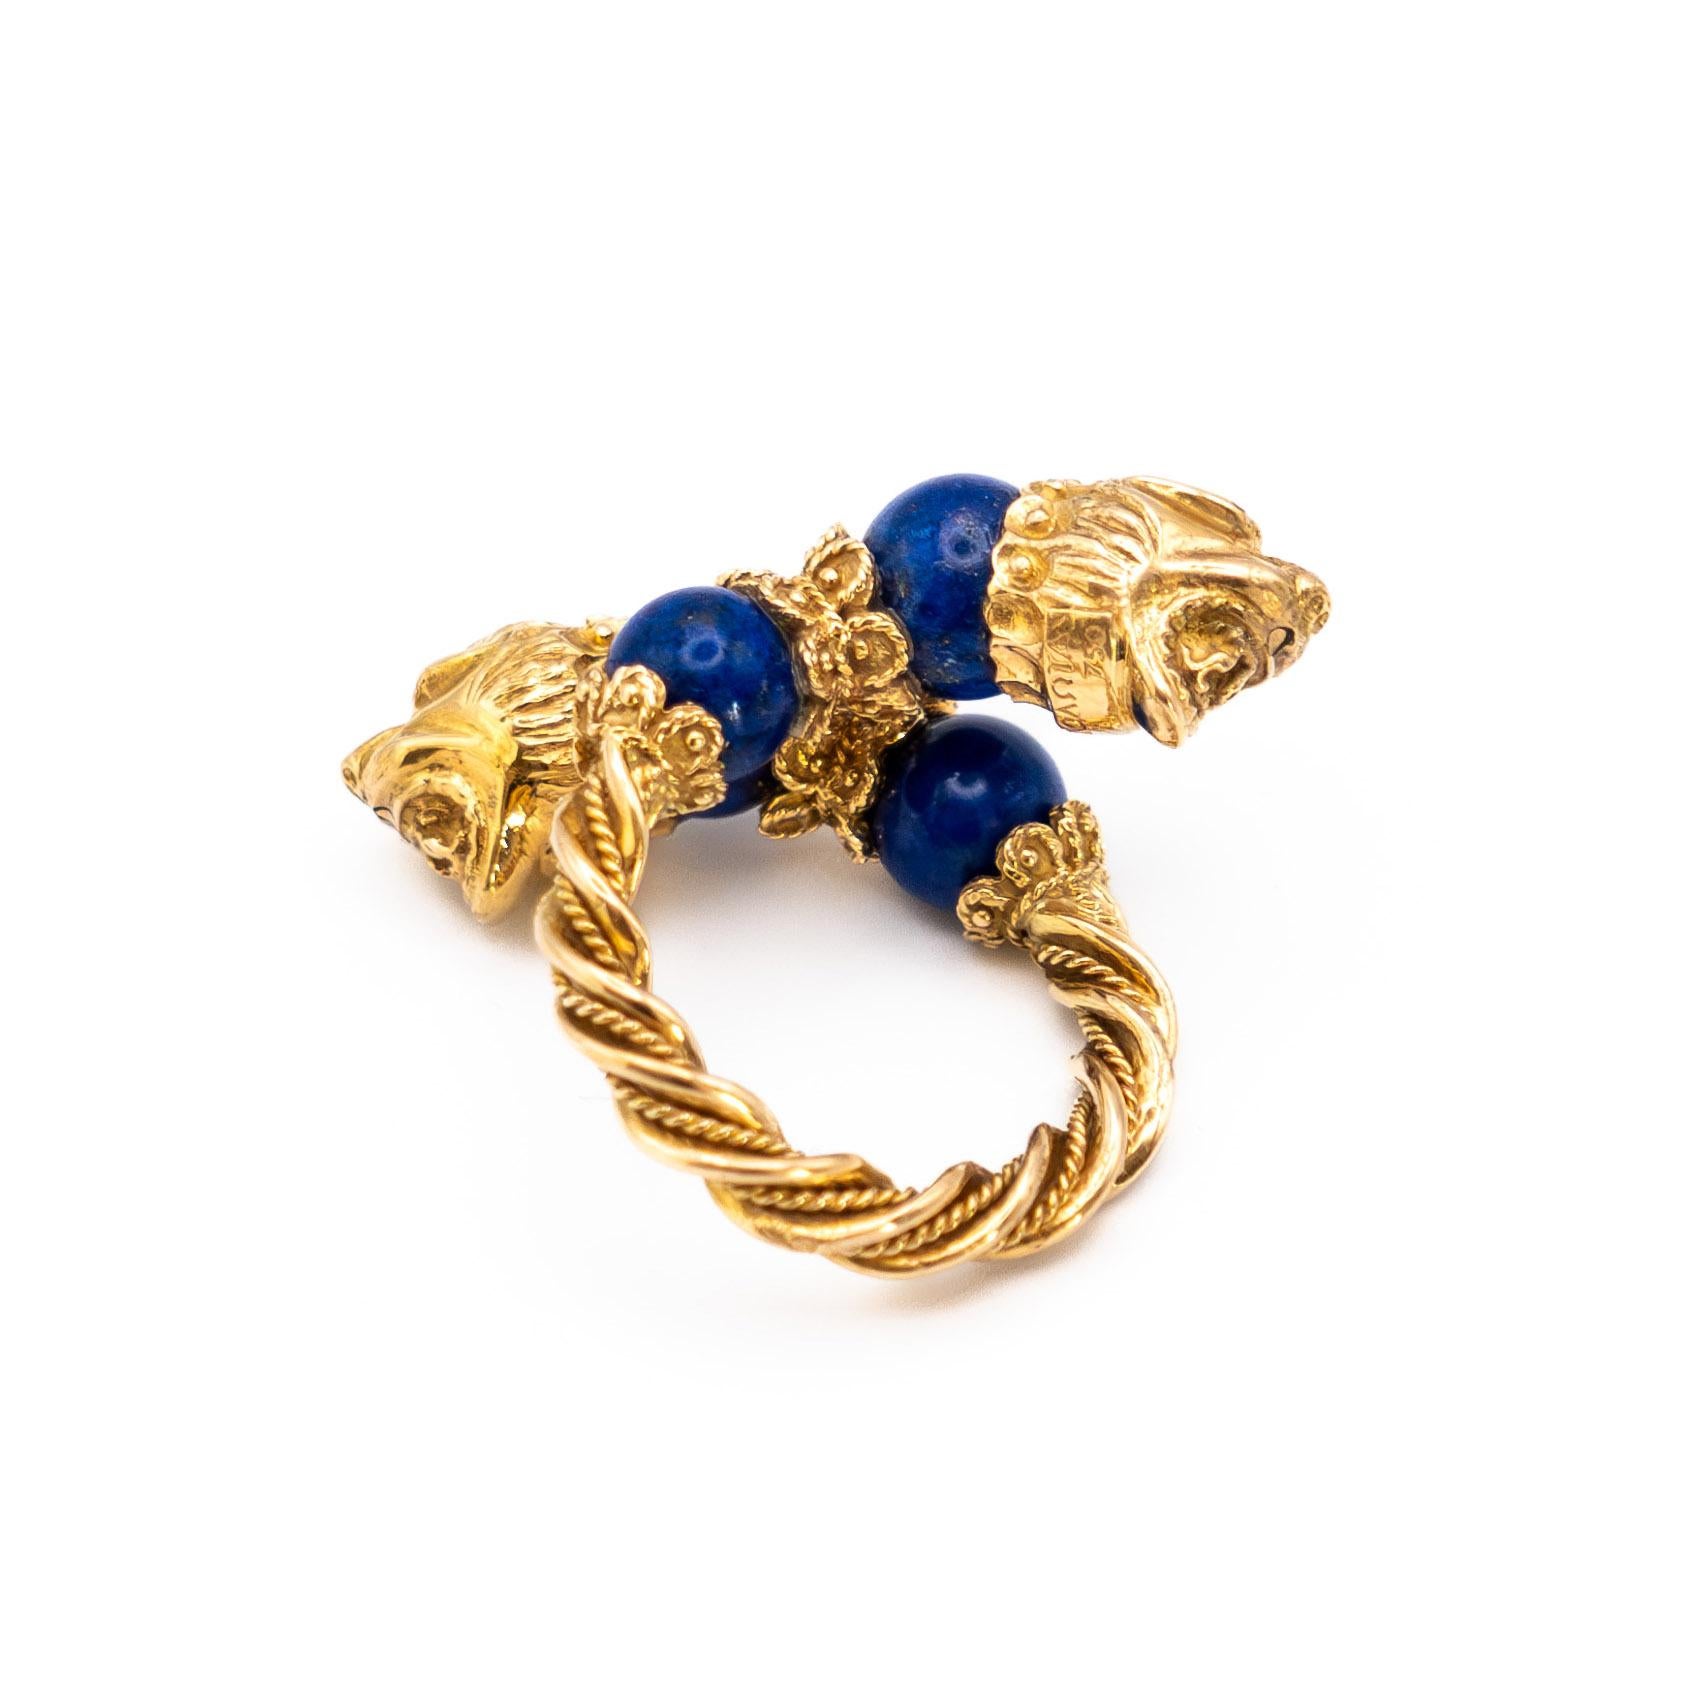 One Two Headed Lion Ring in 18K Gold ornamented with  4 Lapis Lazuli beads
Signed Zolotas - Circa 1970
Size Ring : 52 ( French Size)
Weight : 17.89 g

The Greek firm of Zolotas was founded in 1895 in Athens at the foot of the Acropolis by Efthimios